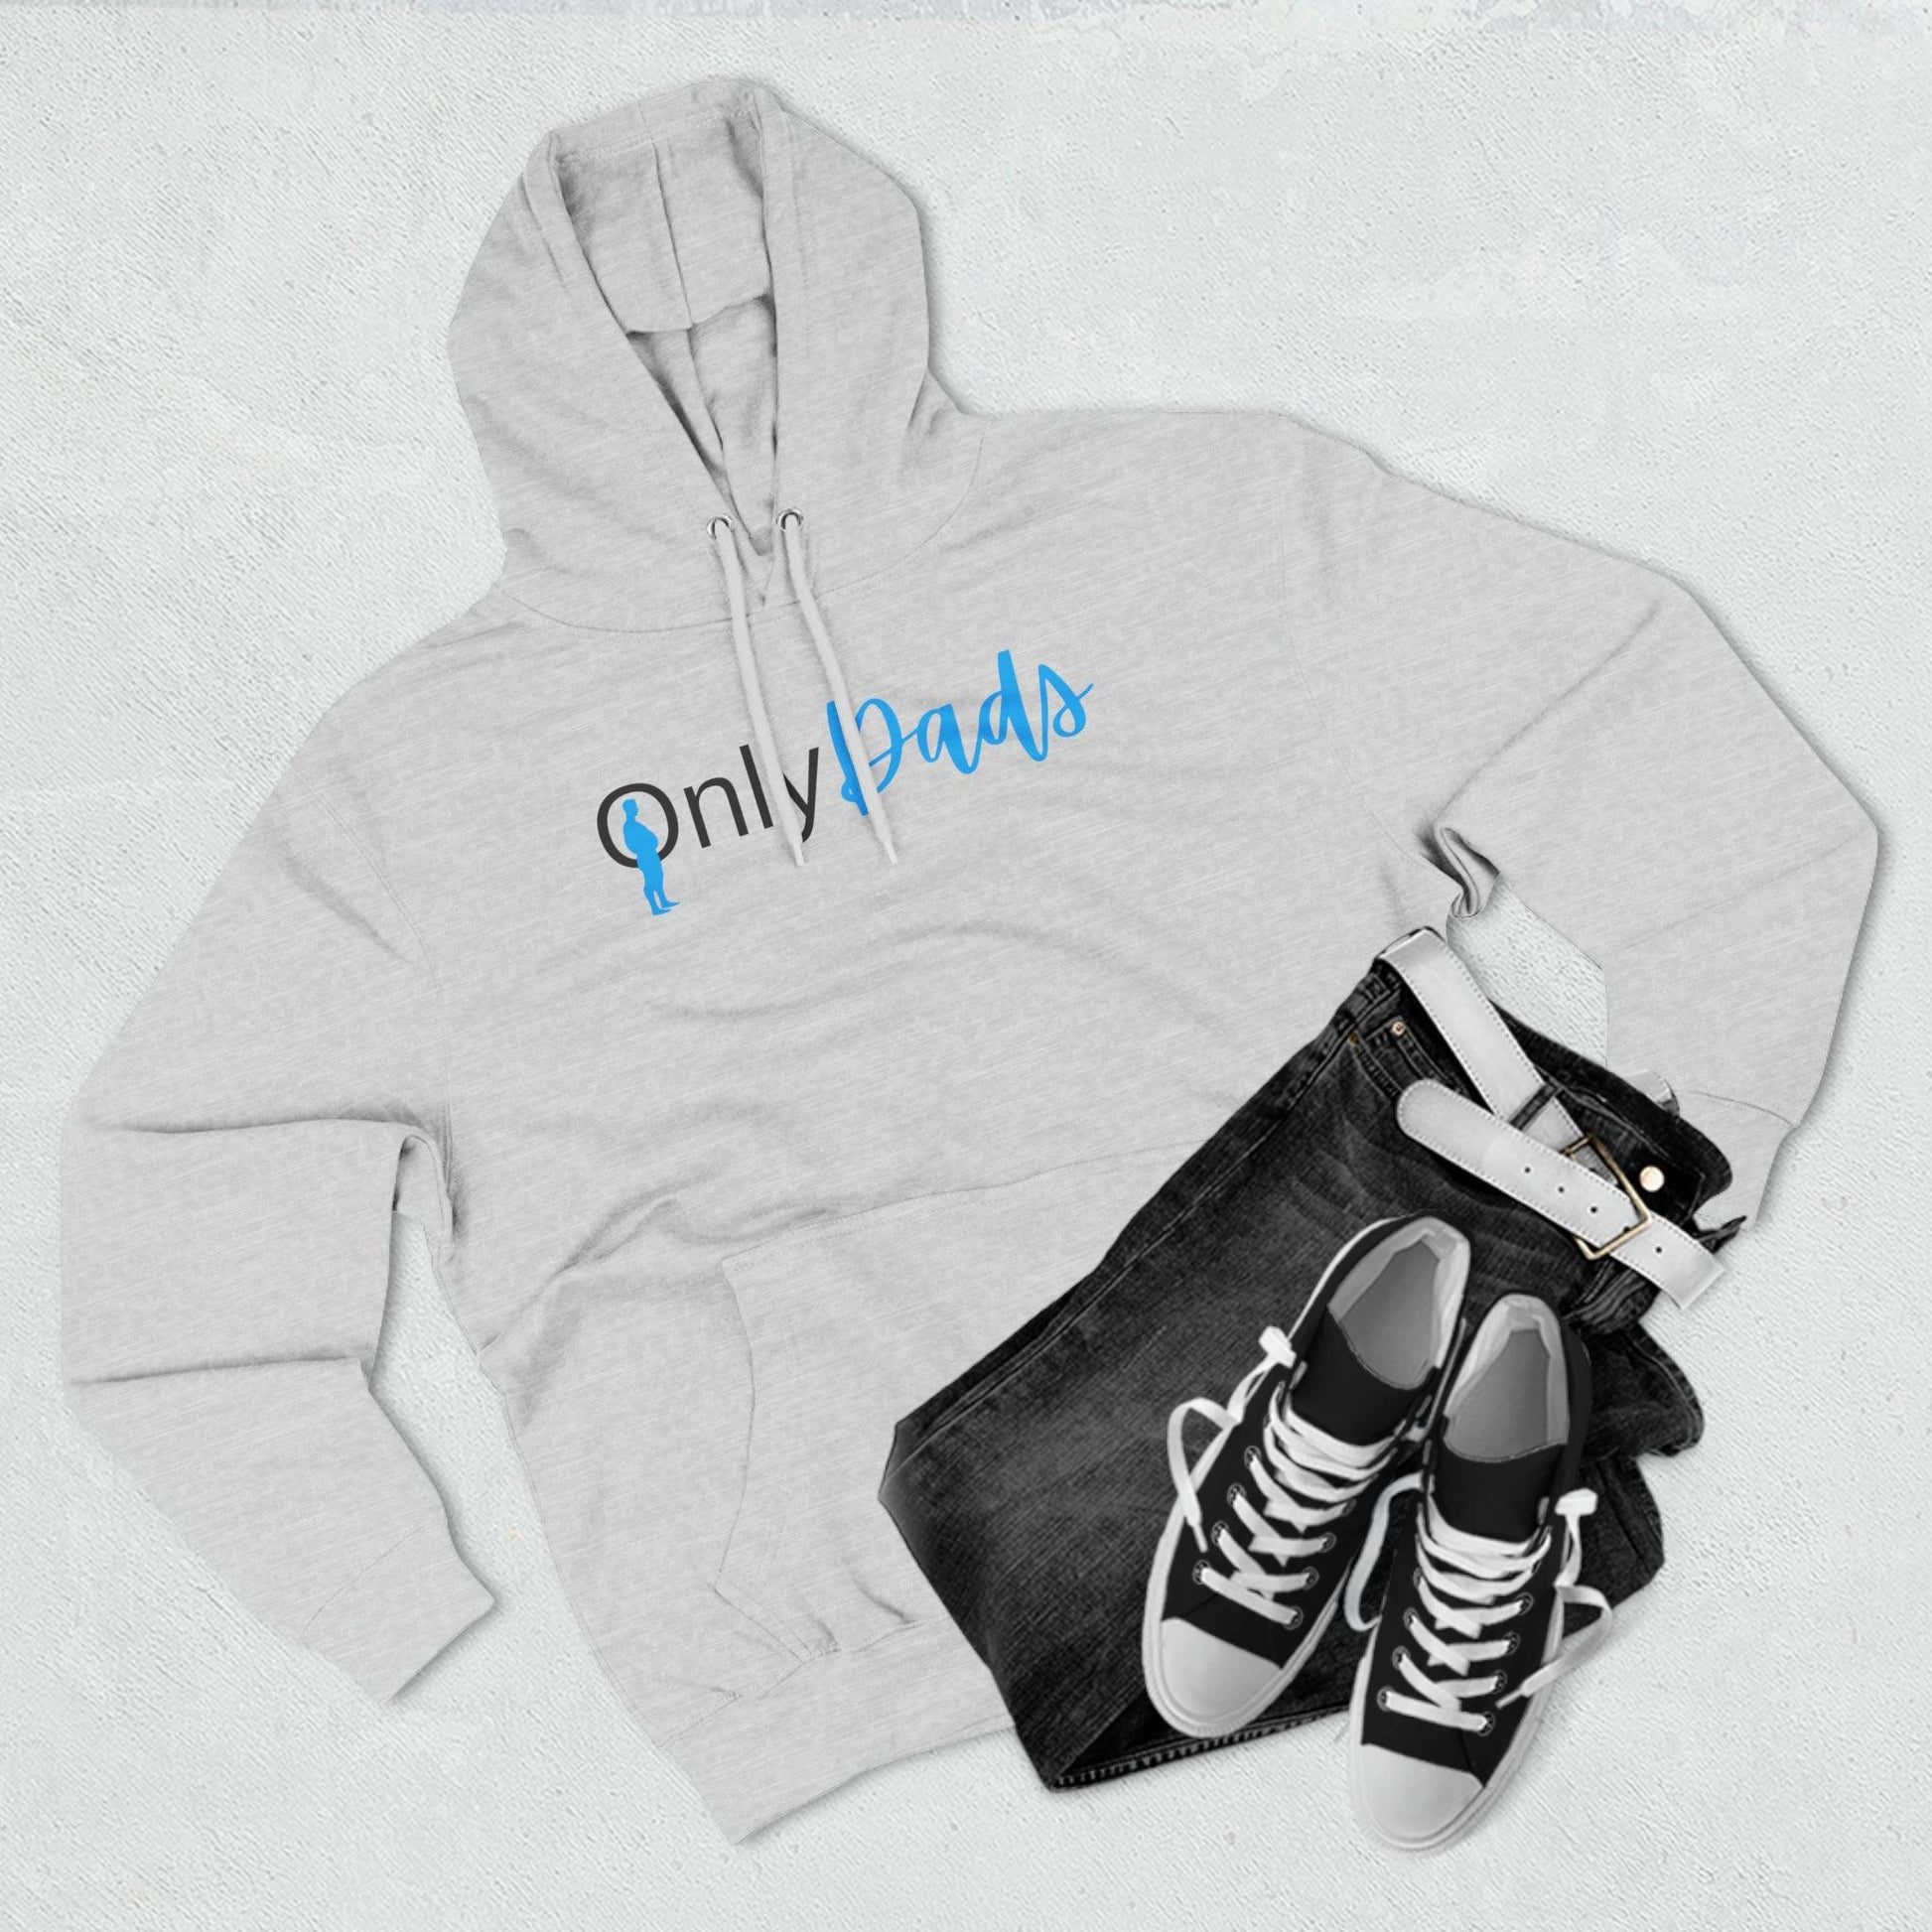 Only Dads - Hoodie - Wicked Naughty Apparel